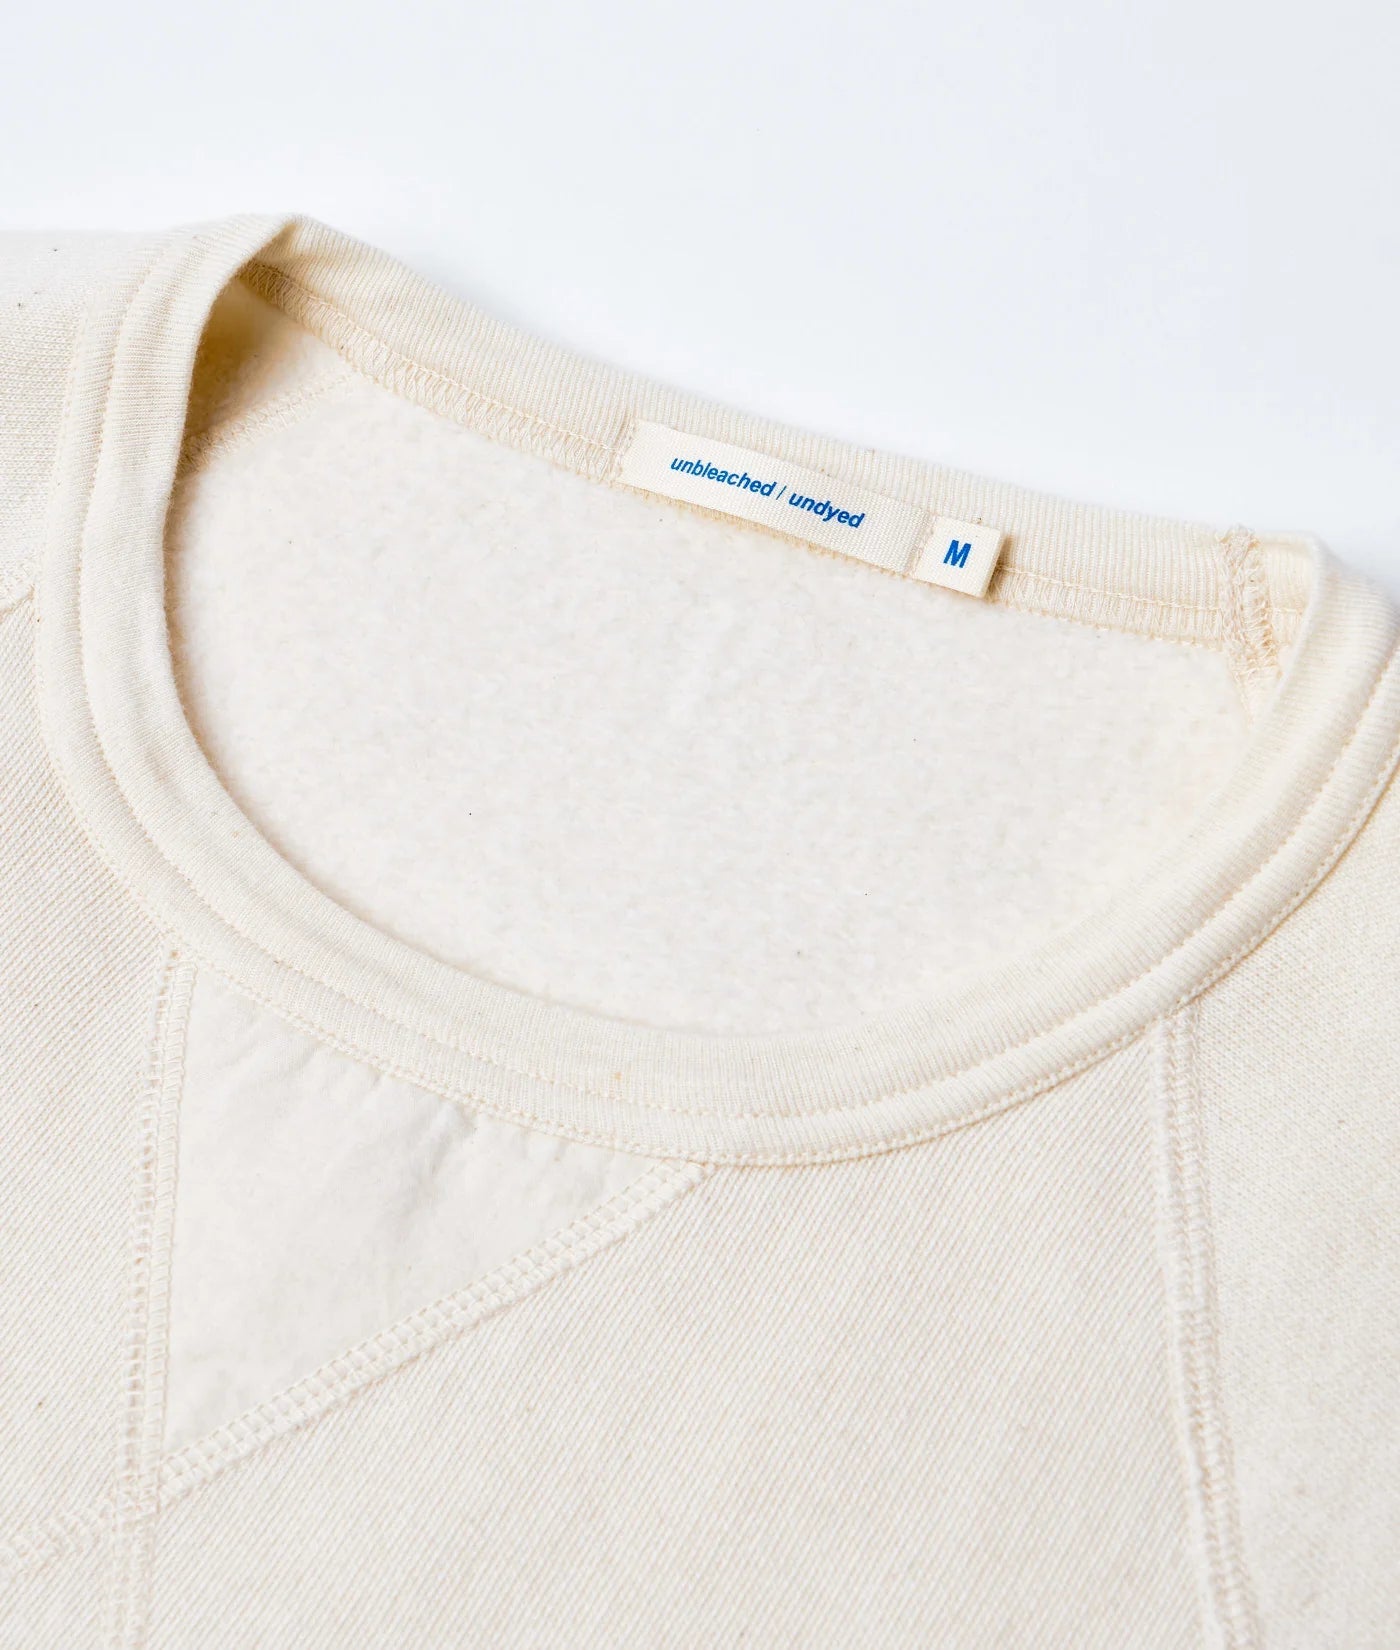 Industry of All Nations Super Sweatshirt, Undyed